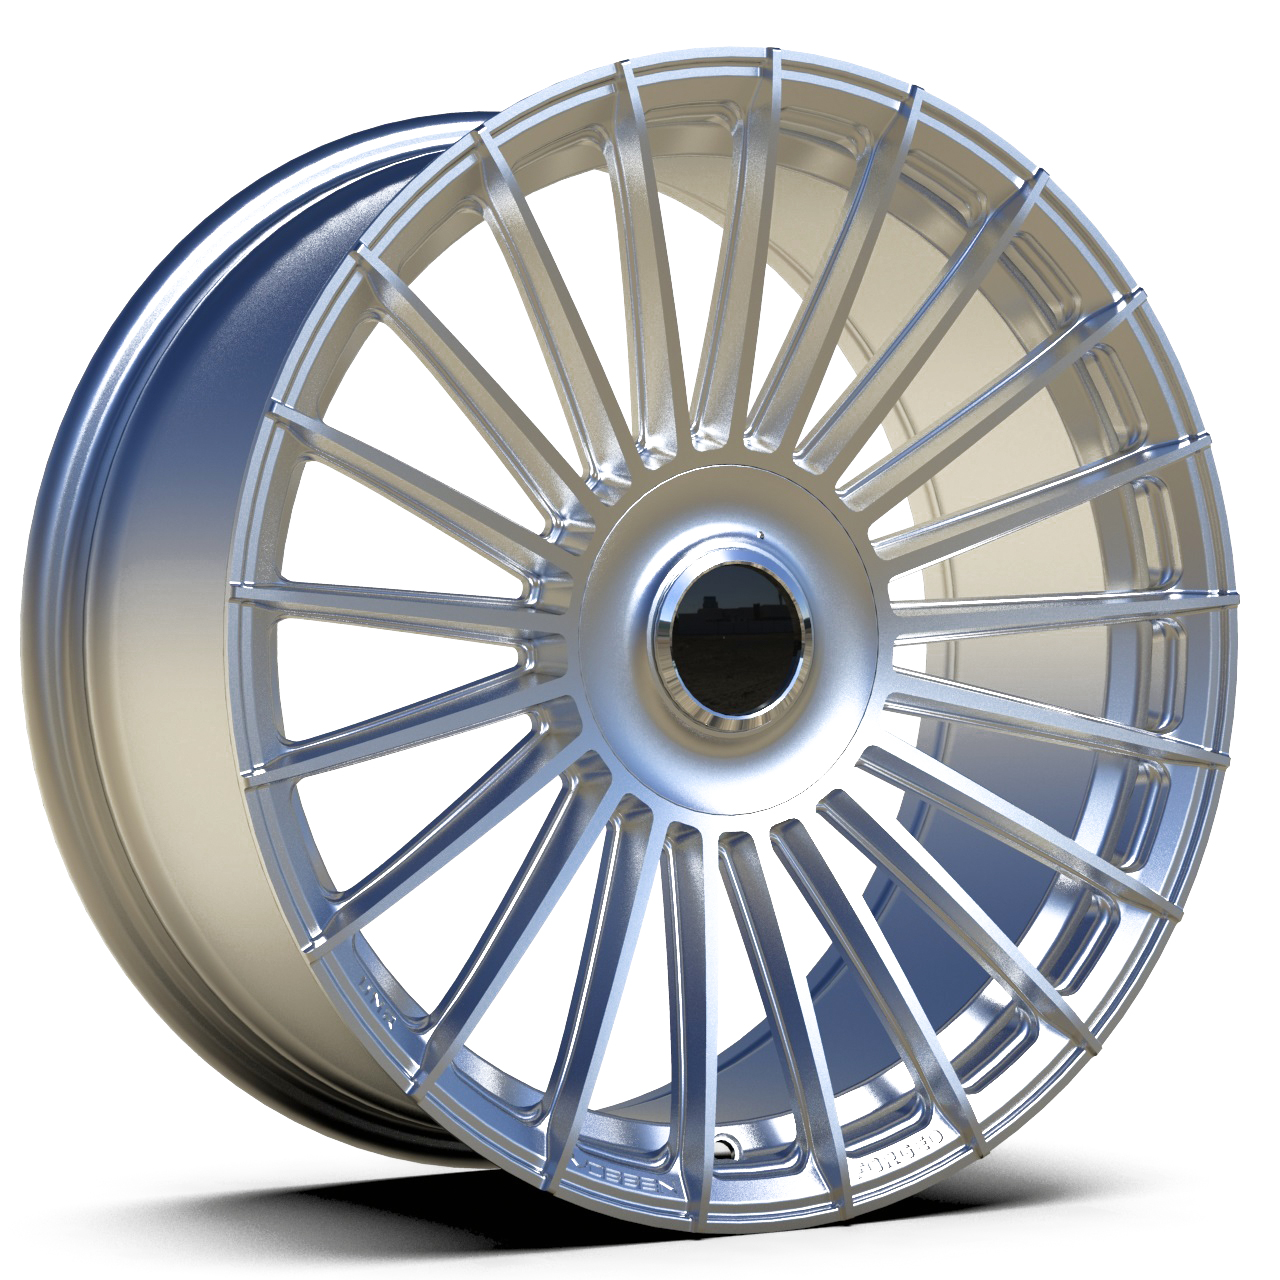 A019 18X8.0 Inch ET 35 Multi Spokes Cast Alloy Wheels From China Wheels Manufacturers Featured Image